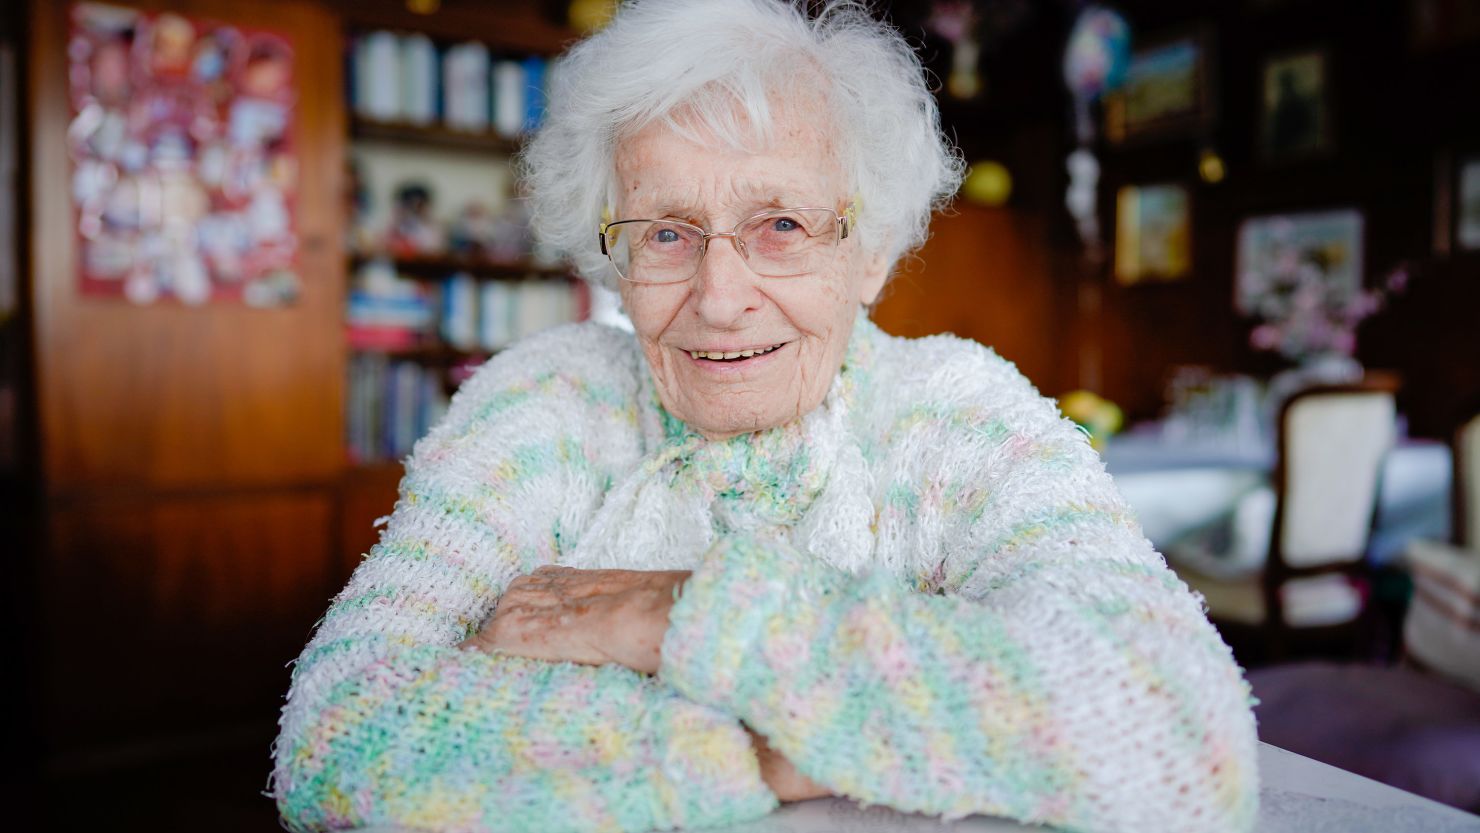 Lisel Heise, 100 years old, has been elected to her local town council in Germany. 